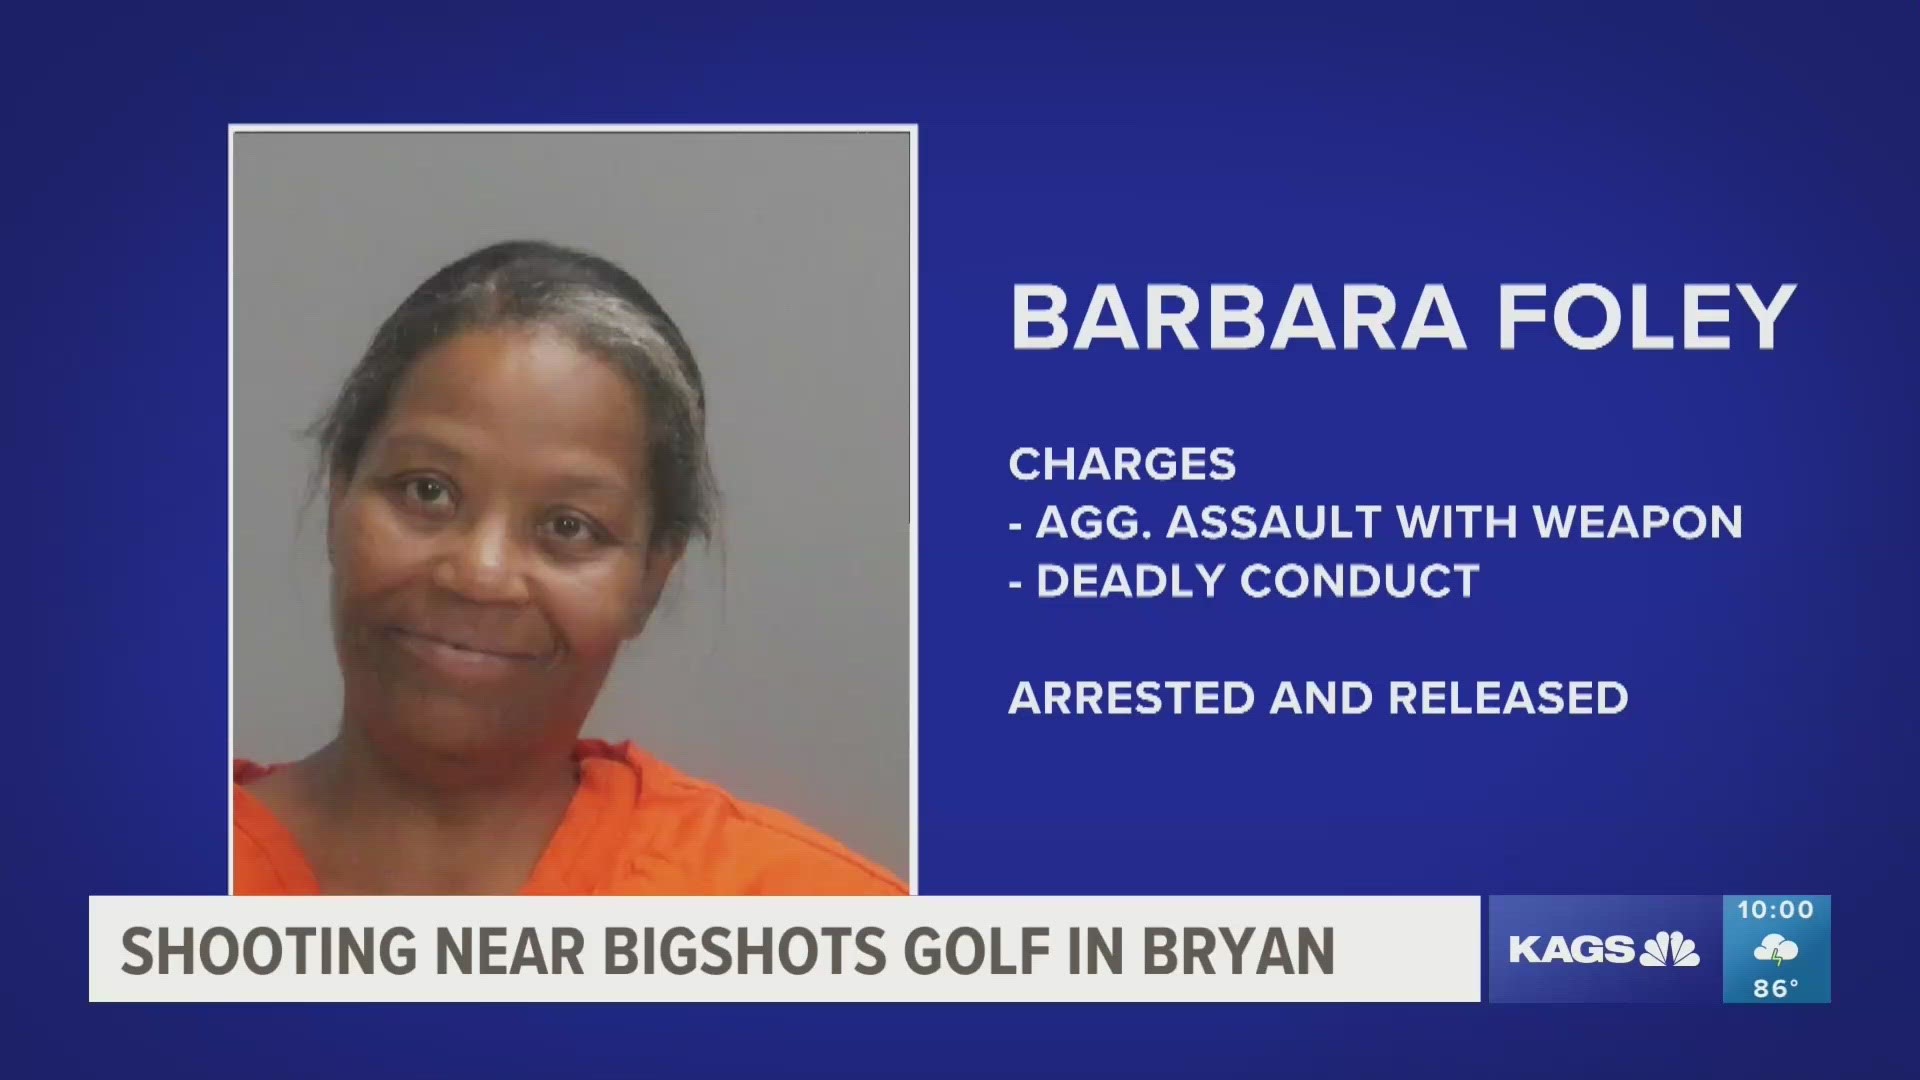 Barbara Foley was arrested by Bryan Police for firing shots at a local BigShots Golf near where a fight broke out on Thursday, June 15.